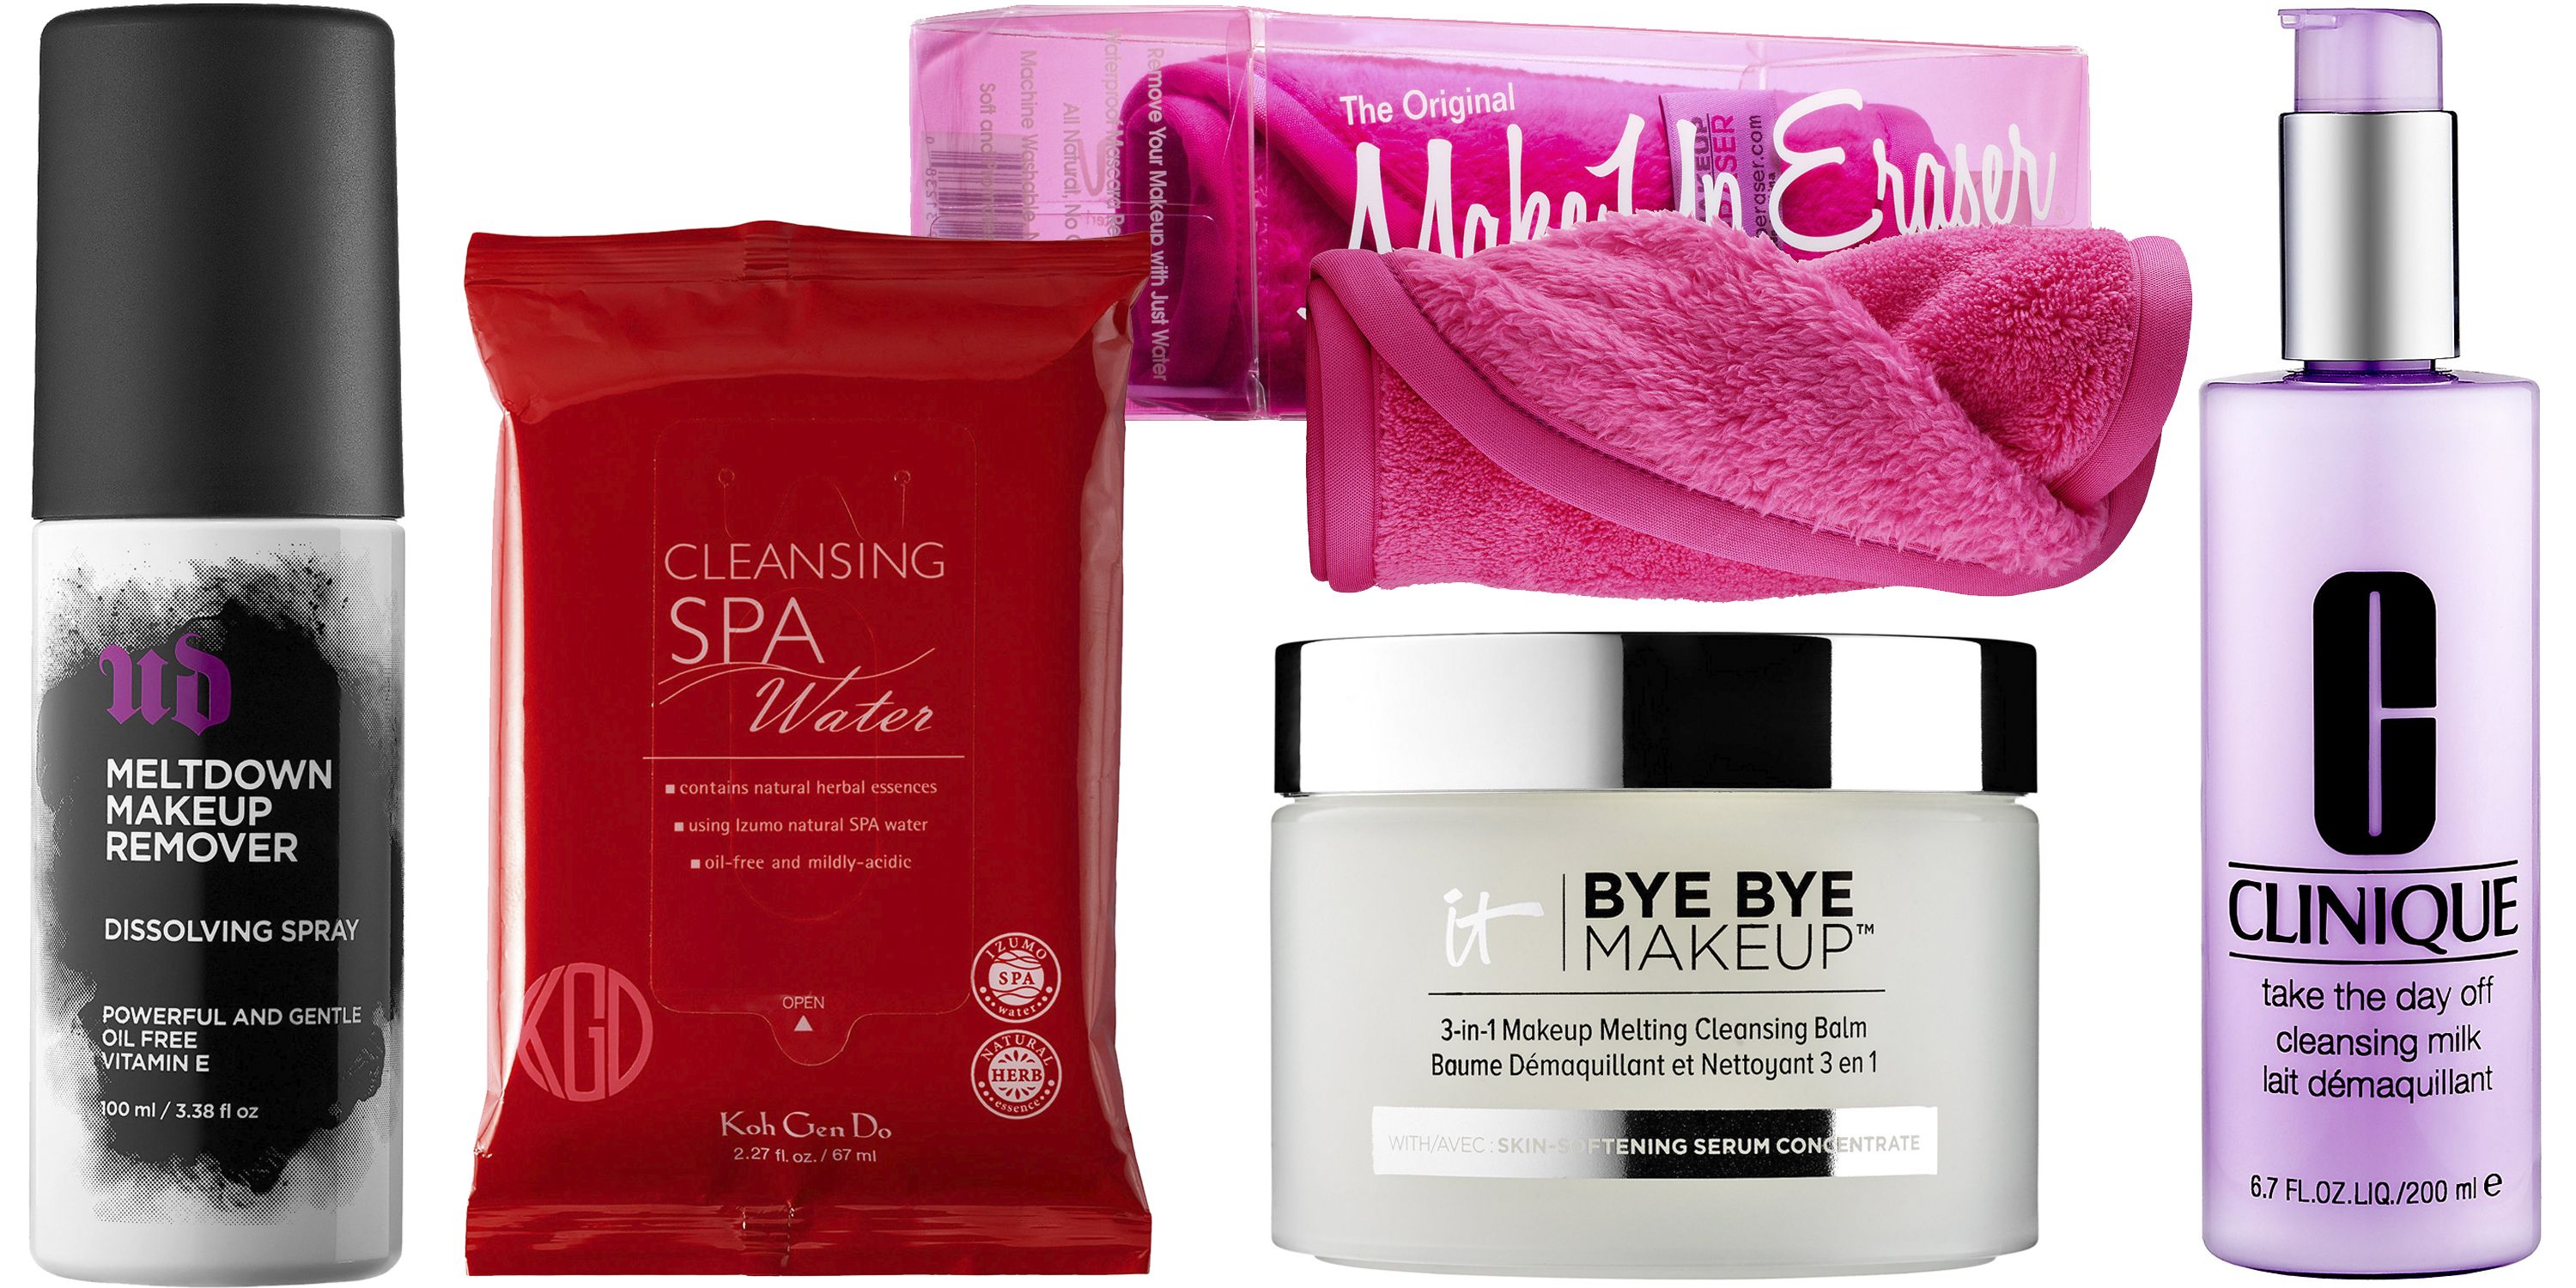 The 10 Best Makeup Removers for Halloween Makeup in 2021